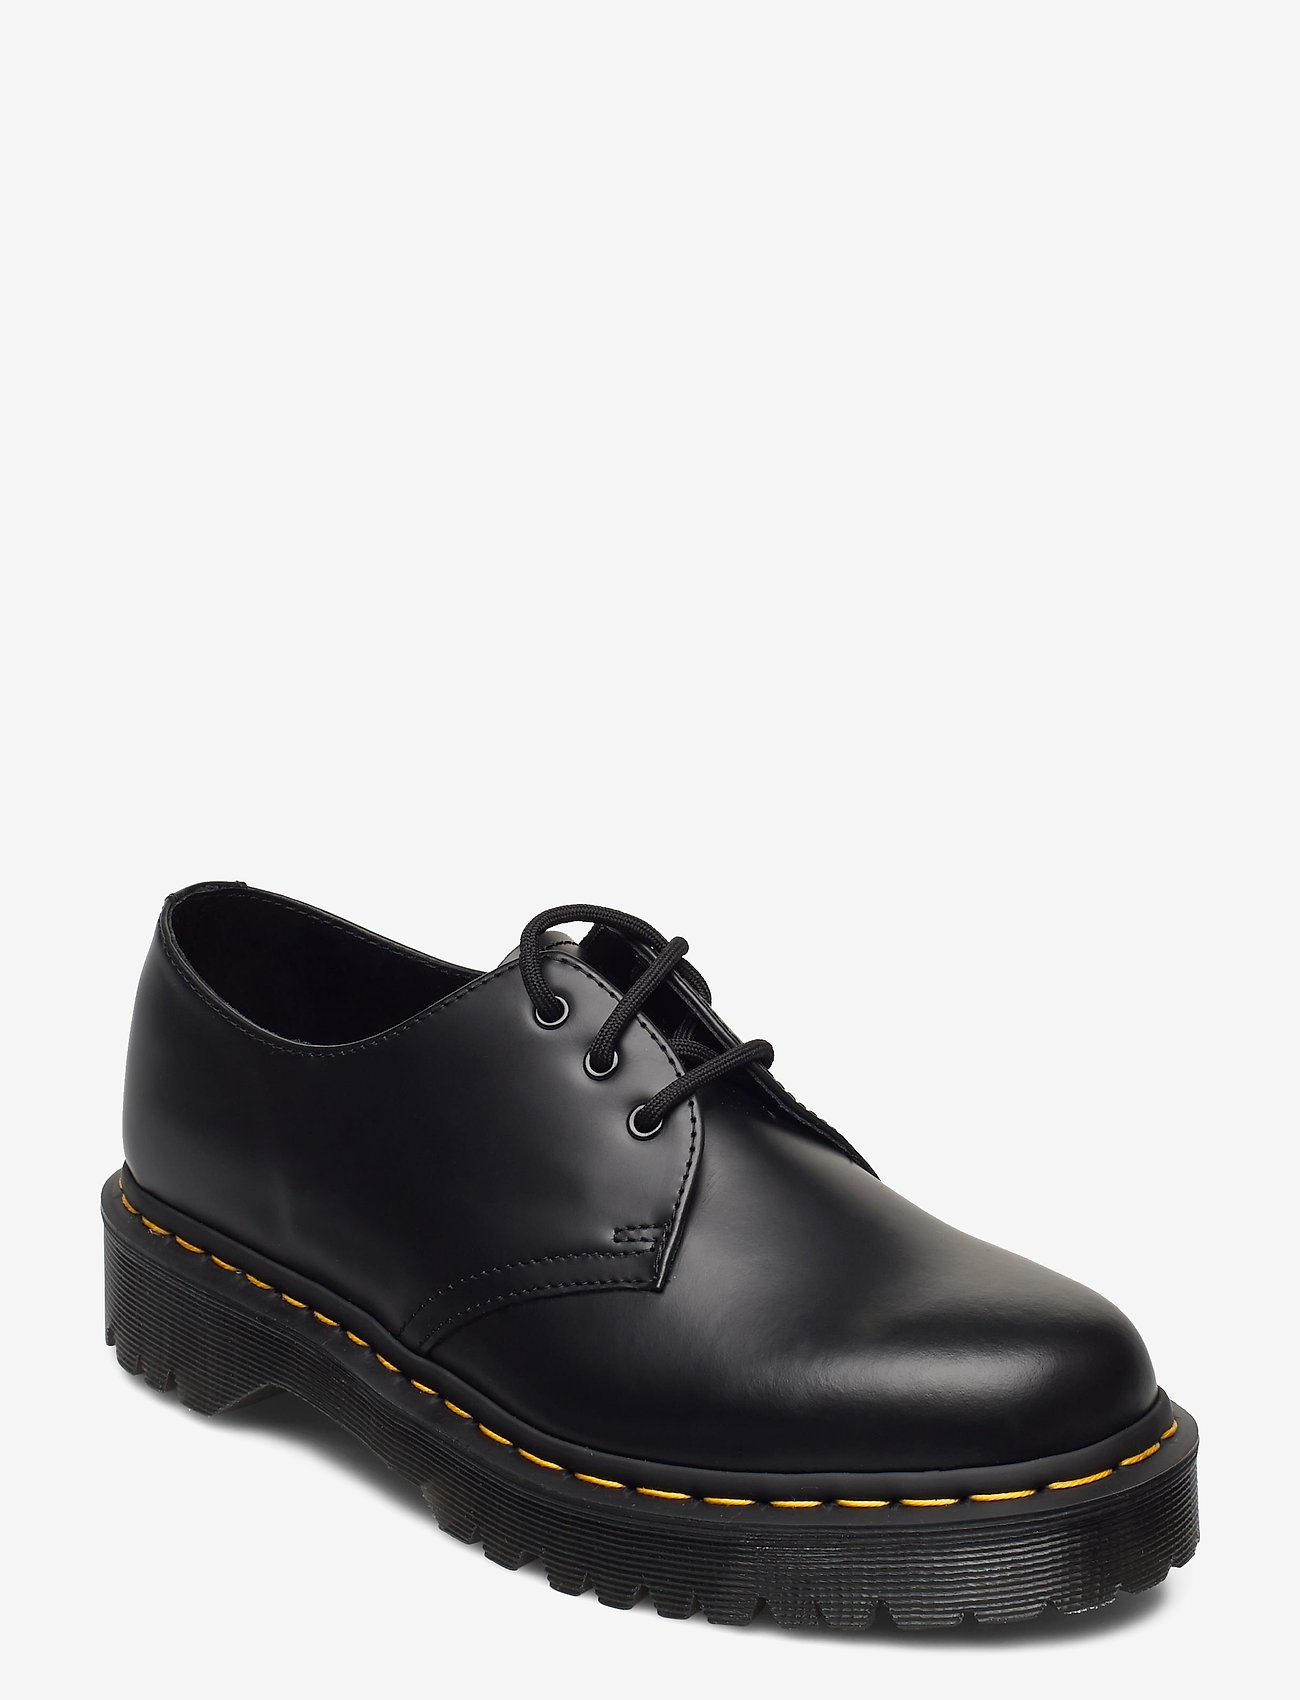 Dr. Martens - 1461 Bex Black Smooth - chaussures oxford - black - 0